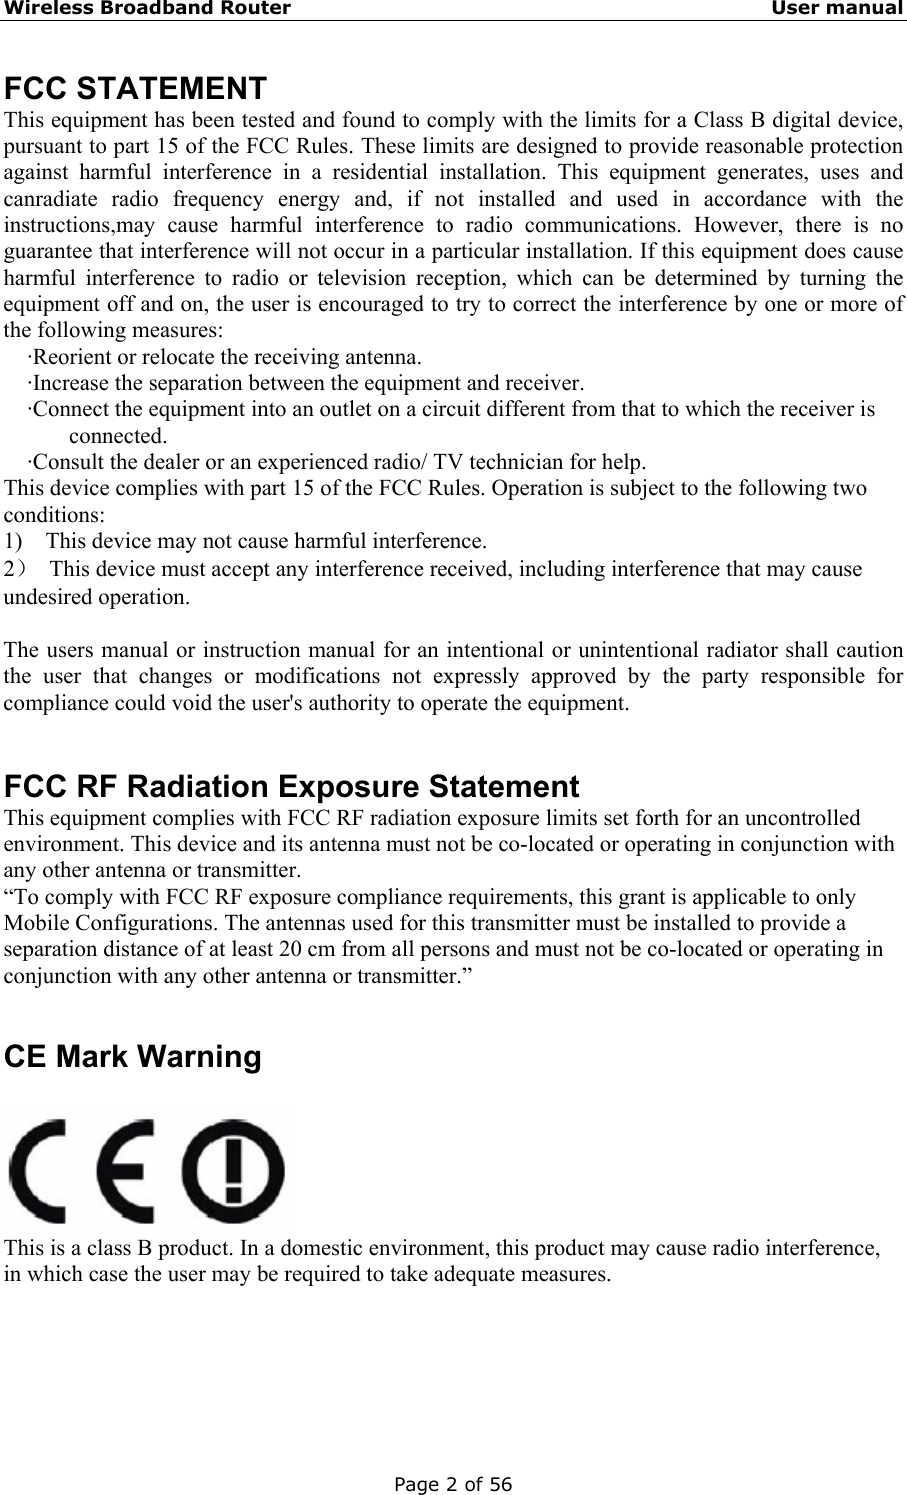 Wireless Broadband Router                                                   User manual Page 2 of 56 FCC STATEMENT This equipment has been tested and found to comply with the limits for a Class B digital device, pursuant to part 15 of the FCC Rules. These limits are designed to provide reasonable protection against harmful interference in a residential installation. This equipment generates, uses and canradiate radio frequency energy and, if not installed and used in accordance with the instructions,may cause harmful interference to radio communications. However, there is no guarantee that interference will not occur in a particular installation. If this equipment does cause harmful interference to radio or television reception, which can be determined by turning the equipment off and on, the user is encouraged to try to correct the interference by one or more of the following measures:  ·Reorient or relocate the receiving antenna.  ·Increase the separation between the equipment and receiver.  ·Connect the equipment into an outlet on a circuit different from that to which the receiver is connected.  ·Consult the dealer or an experienced radio/ TV technician for help. This device complies with part 15 of the FCC Rules. Operation is subject to the following two conditions: 1)    This device may not cause harmful interference. 2）  This device must accept any interference received, including interference that may cause undesired operation.  The users manual or instruction manual for an intentional or unintentional radiator shall caution the user that changes or modifications not expressly approved by the party responsible for compliance could void the user&apos;s authority to operate the equipment.   FCC RF Radiation Exposure Statement This equipment complies with FCC RF radiation exposure limits set forth for an uncontrolled environment. This device and its antenna must not be co-located or operating in conjunction with any other antenna or transmitter. “To comply with FCC RF exposure compliance requirements, this grant is applicable to only Mobile Configurations. The antennas used for this transmitter must be installed to provide a separation distance of at least 20 cm from all persons and must not be co-located or operating in conjunction with any other antenna or transmitter.”   CE Mark Warning   This is a class B product. In a domestic environment, this product may cause radio interference, in which case the user may be required to take adequate measures.      